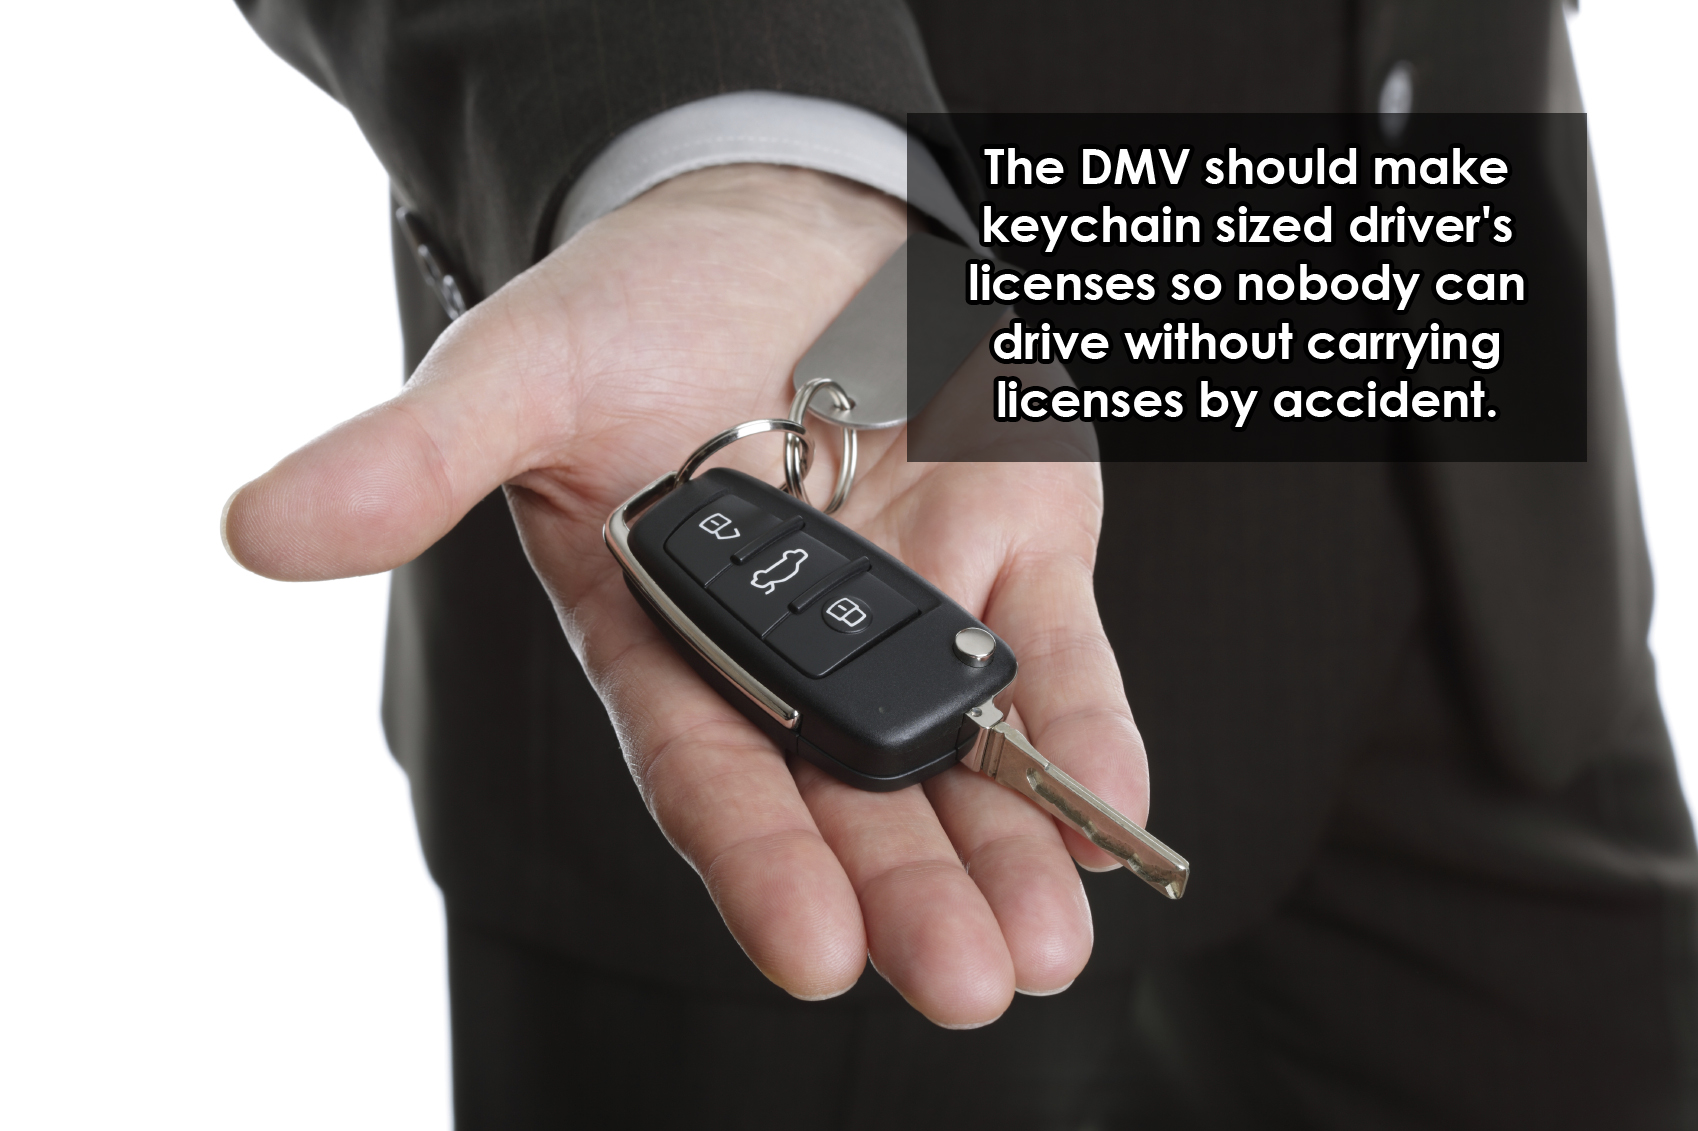 keys to a car - The Dmv should make keychain sized driver's licenses so nobody can drive without carrying licenses by accident. 30